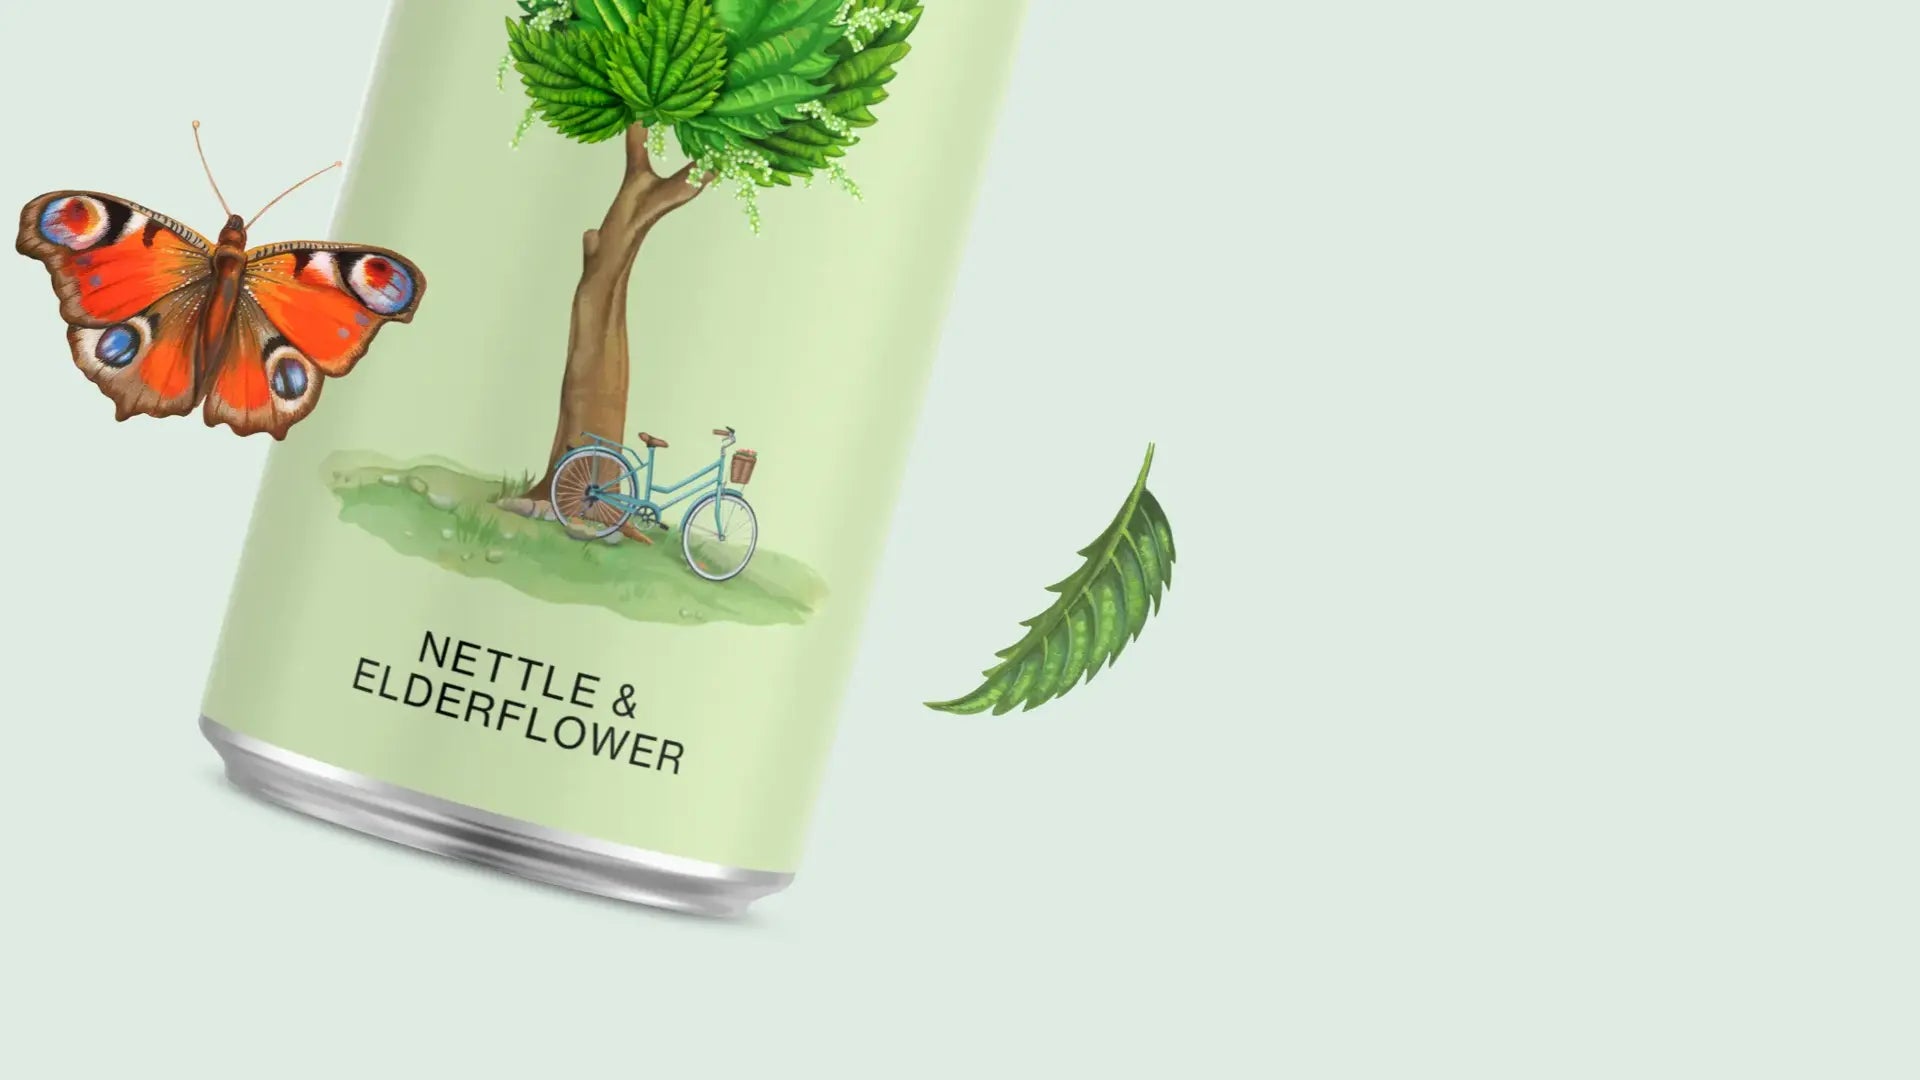 Background image with  a can of Nuisance premium nettle and elderflower botanical drink